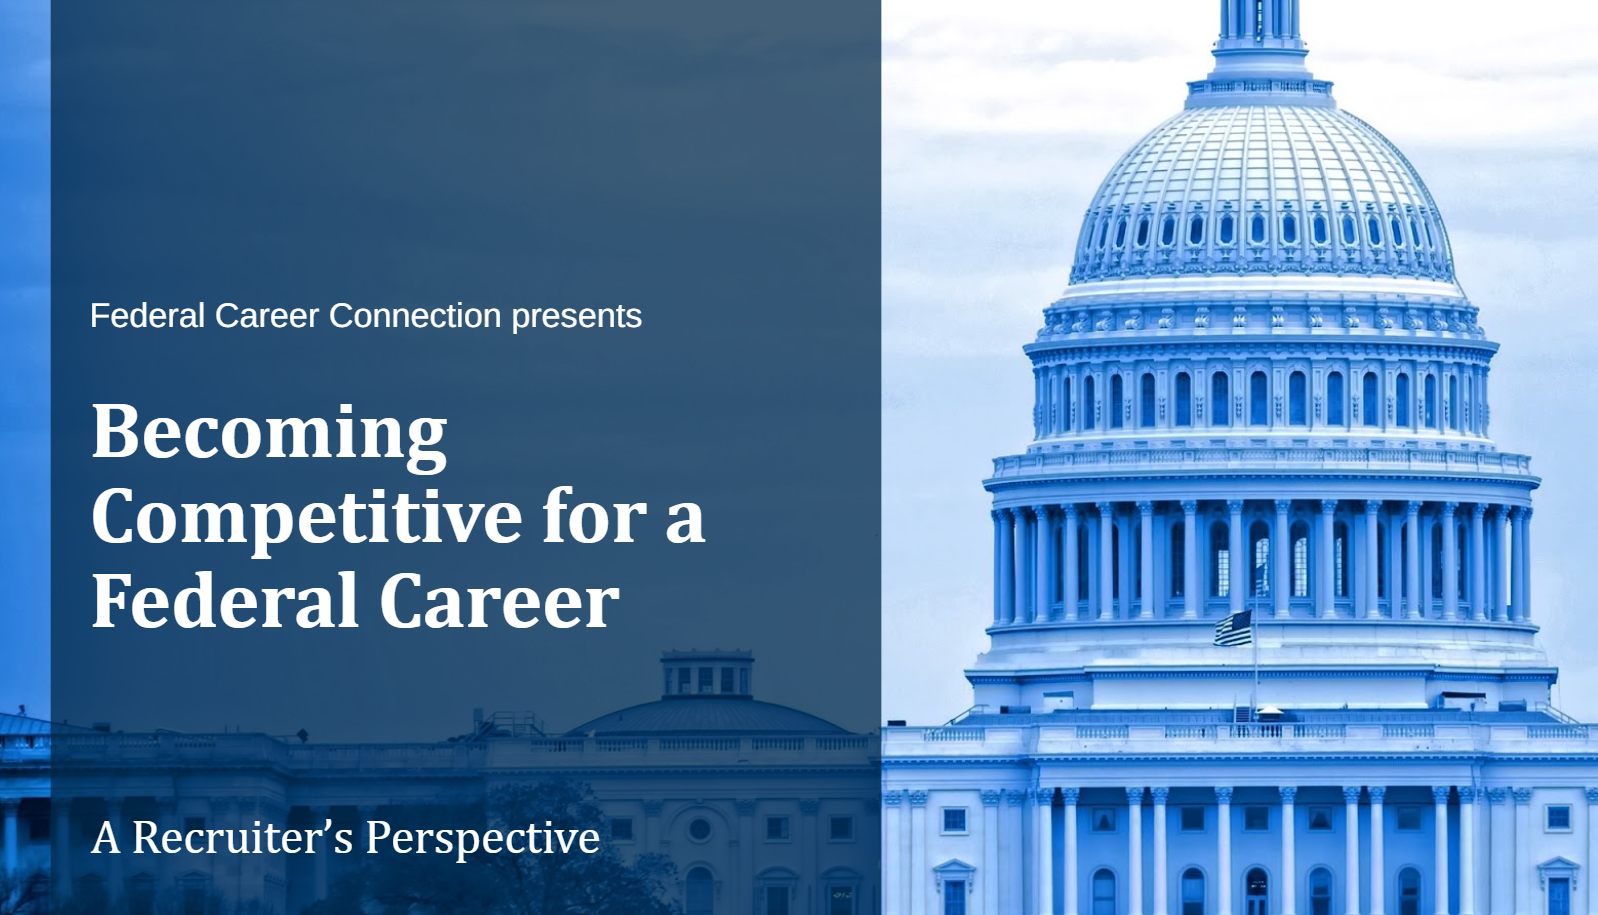 Federal Career Connection